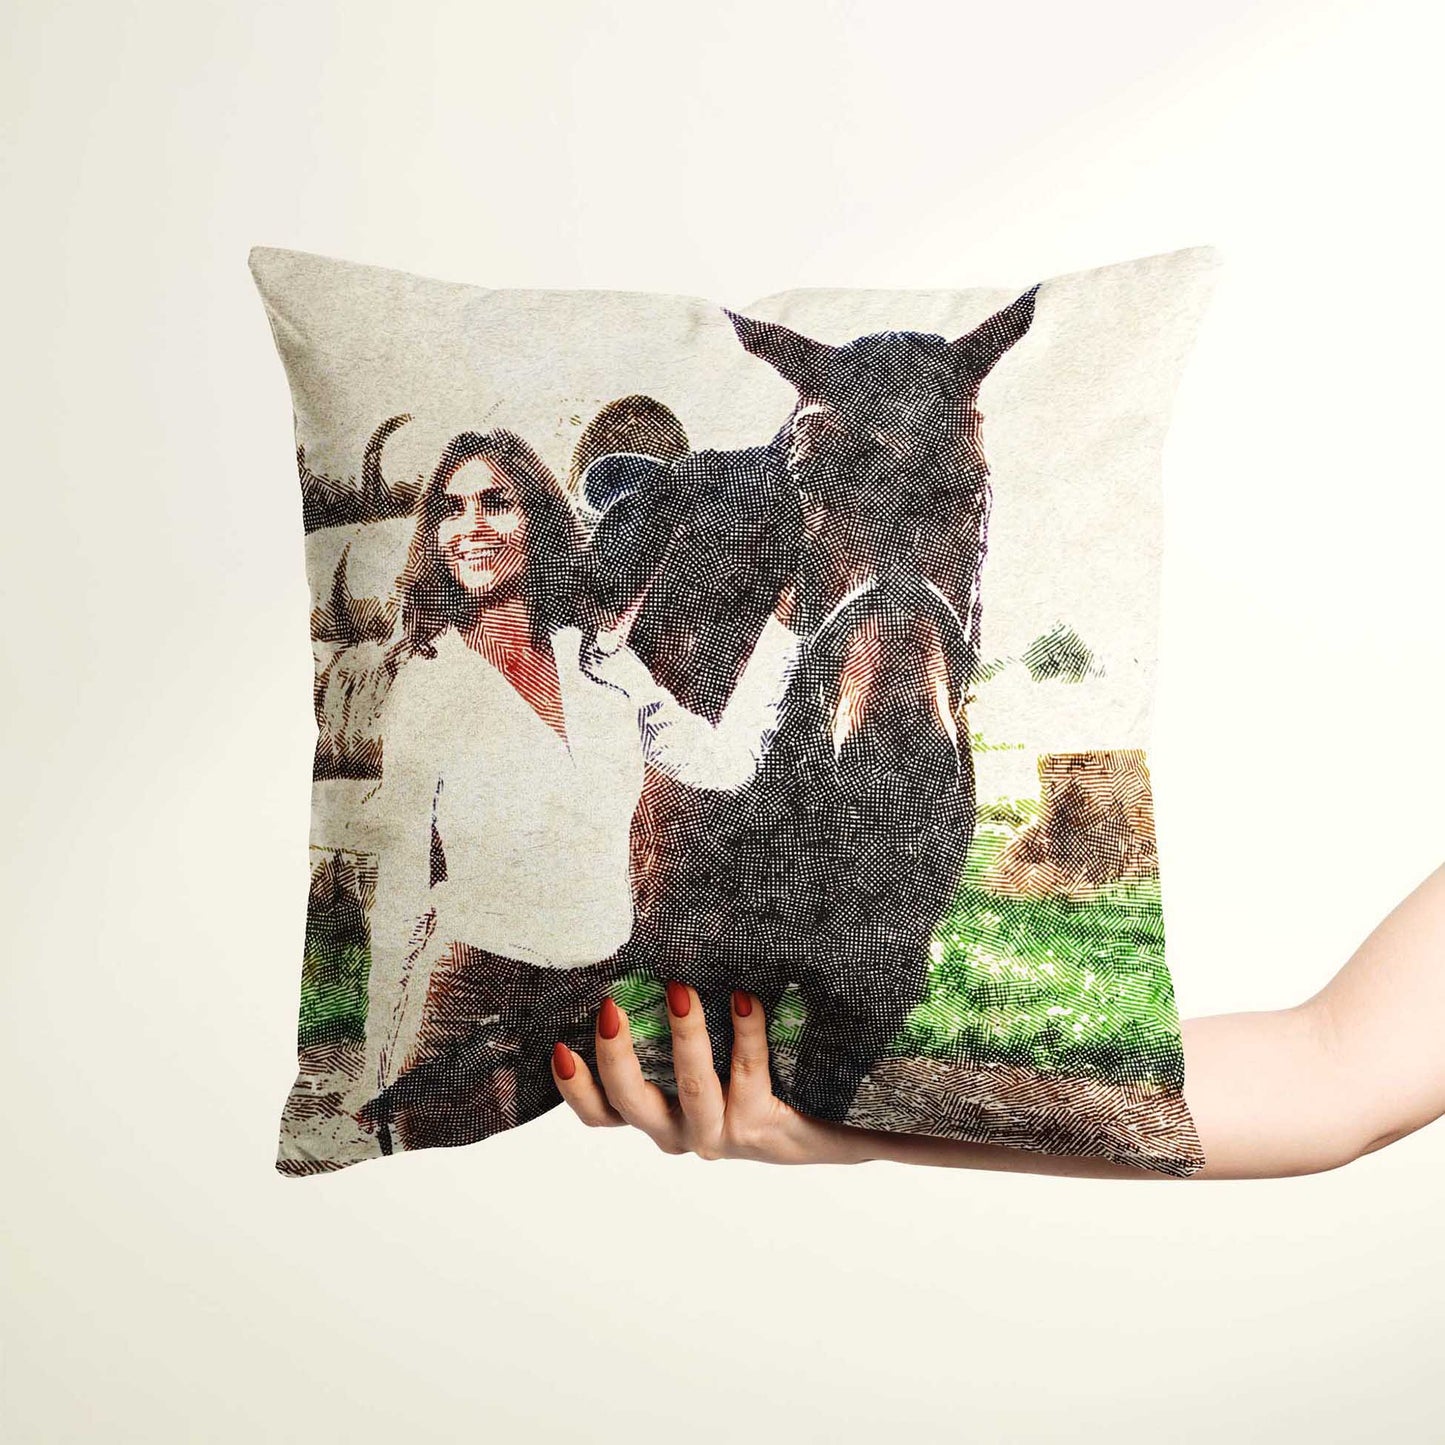 Elevate your home decor with the Personalised Crosshatch Cushion, a true artistic masterpiece. This cushion features a painting created from your photo, bringing a natural texture and a one-of-a-kind look